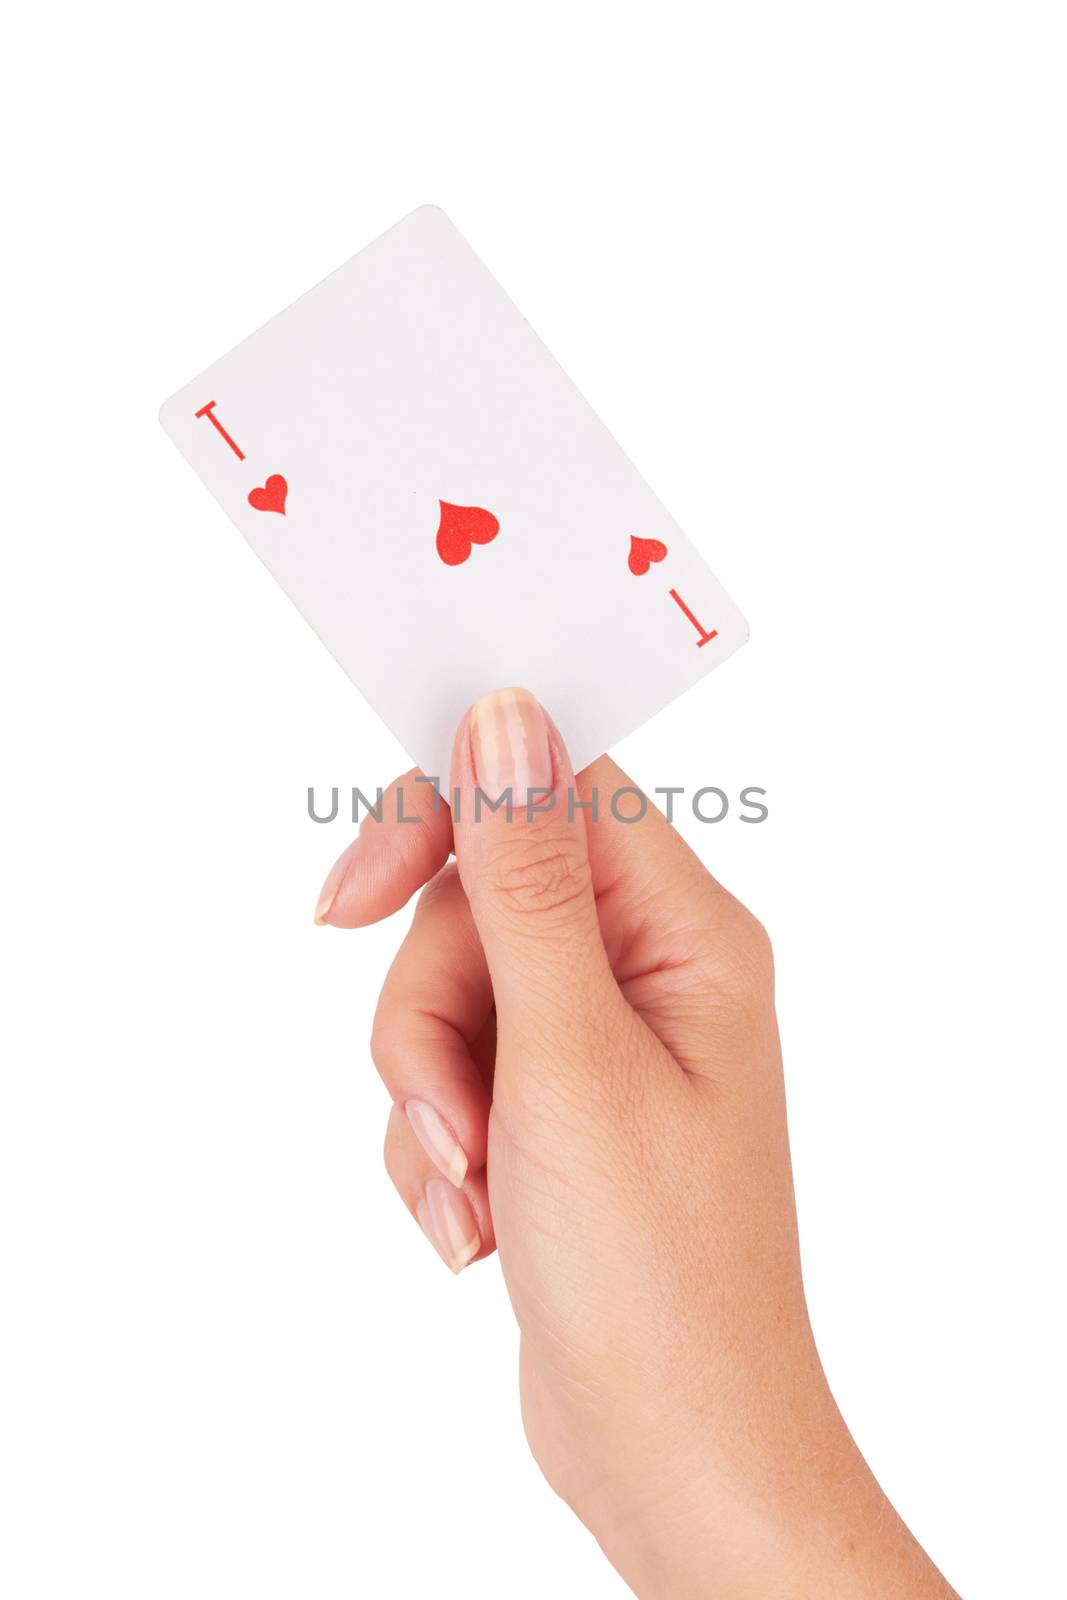 Ace of hearts in hand on a white 